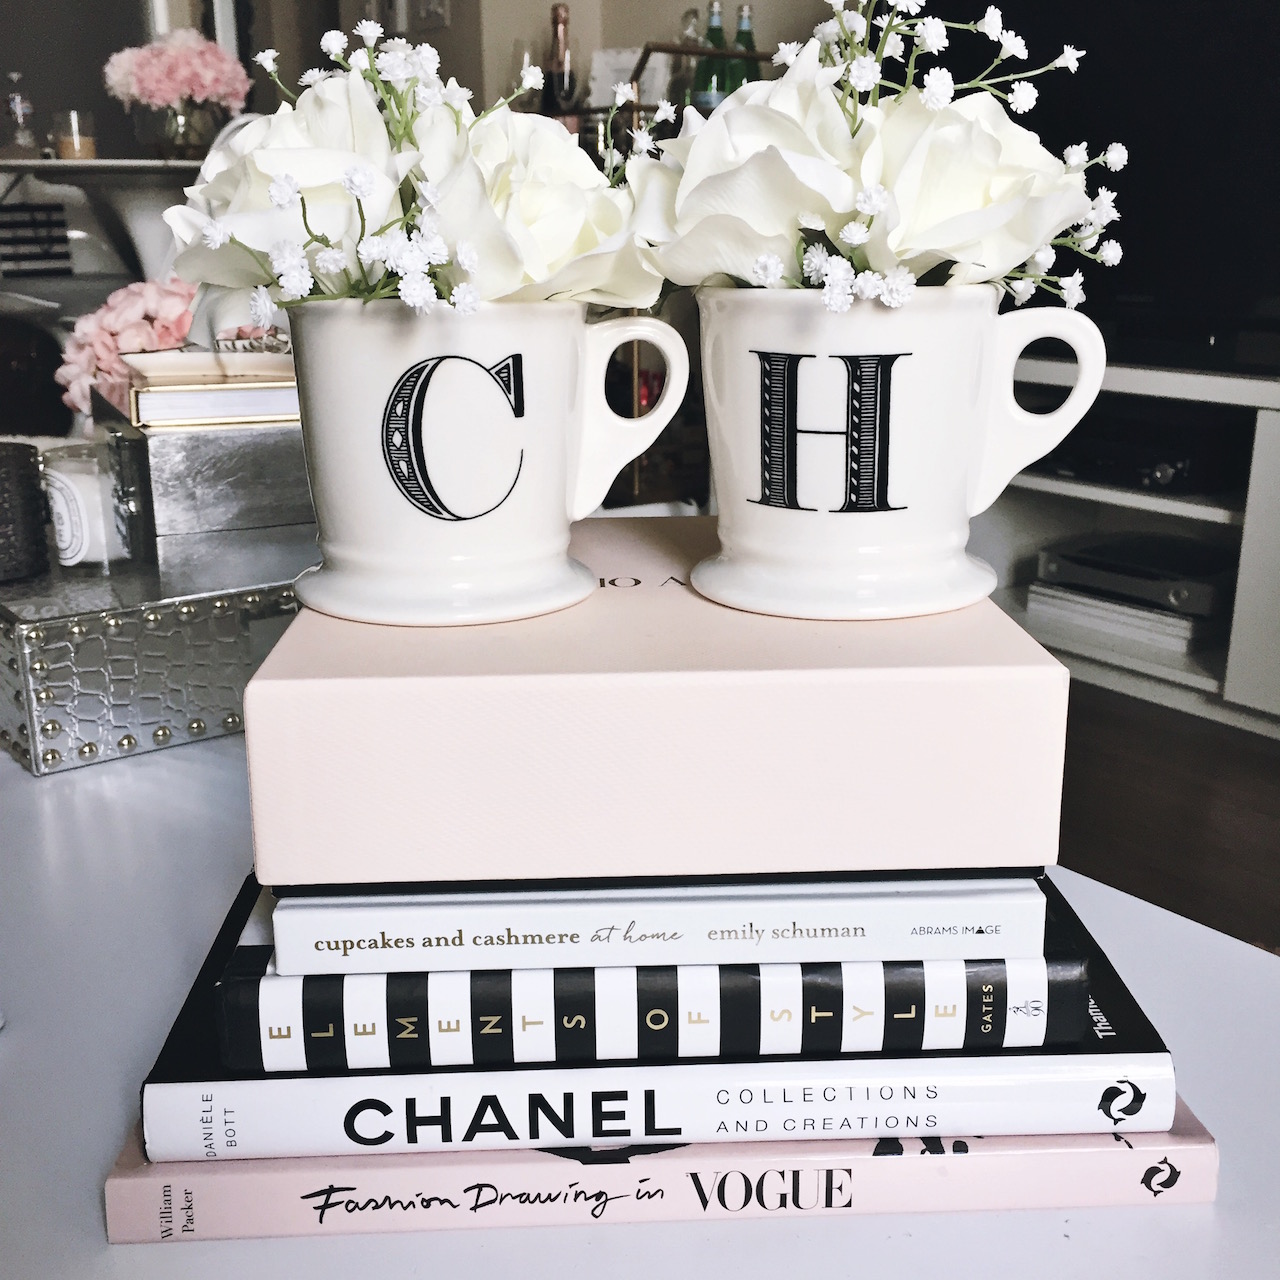 Fashion Book for the coffee table | StyledByBlondie.com